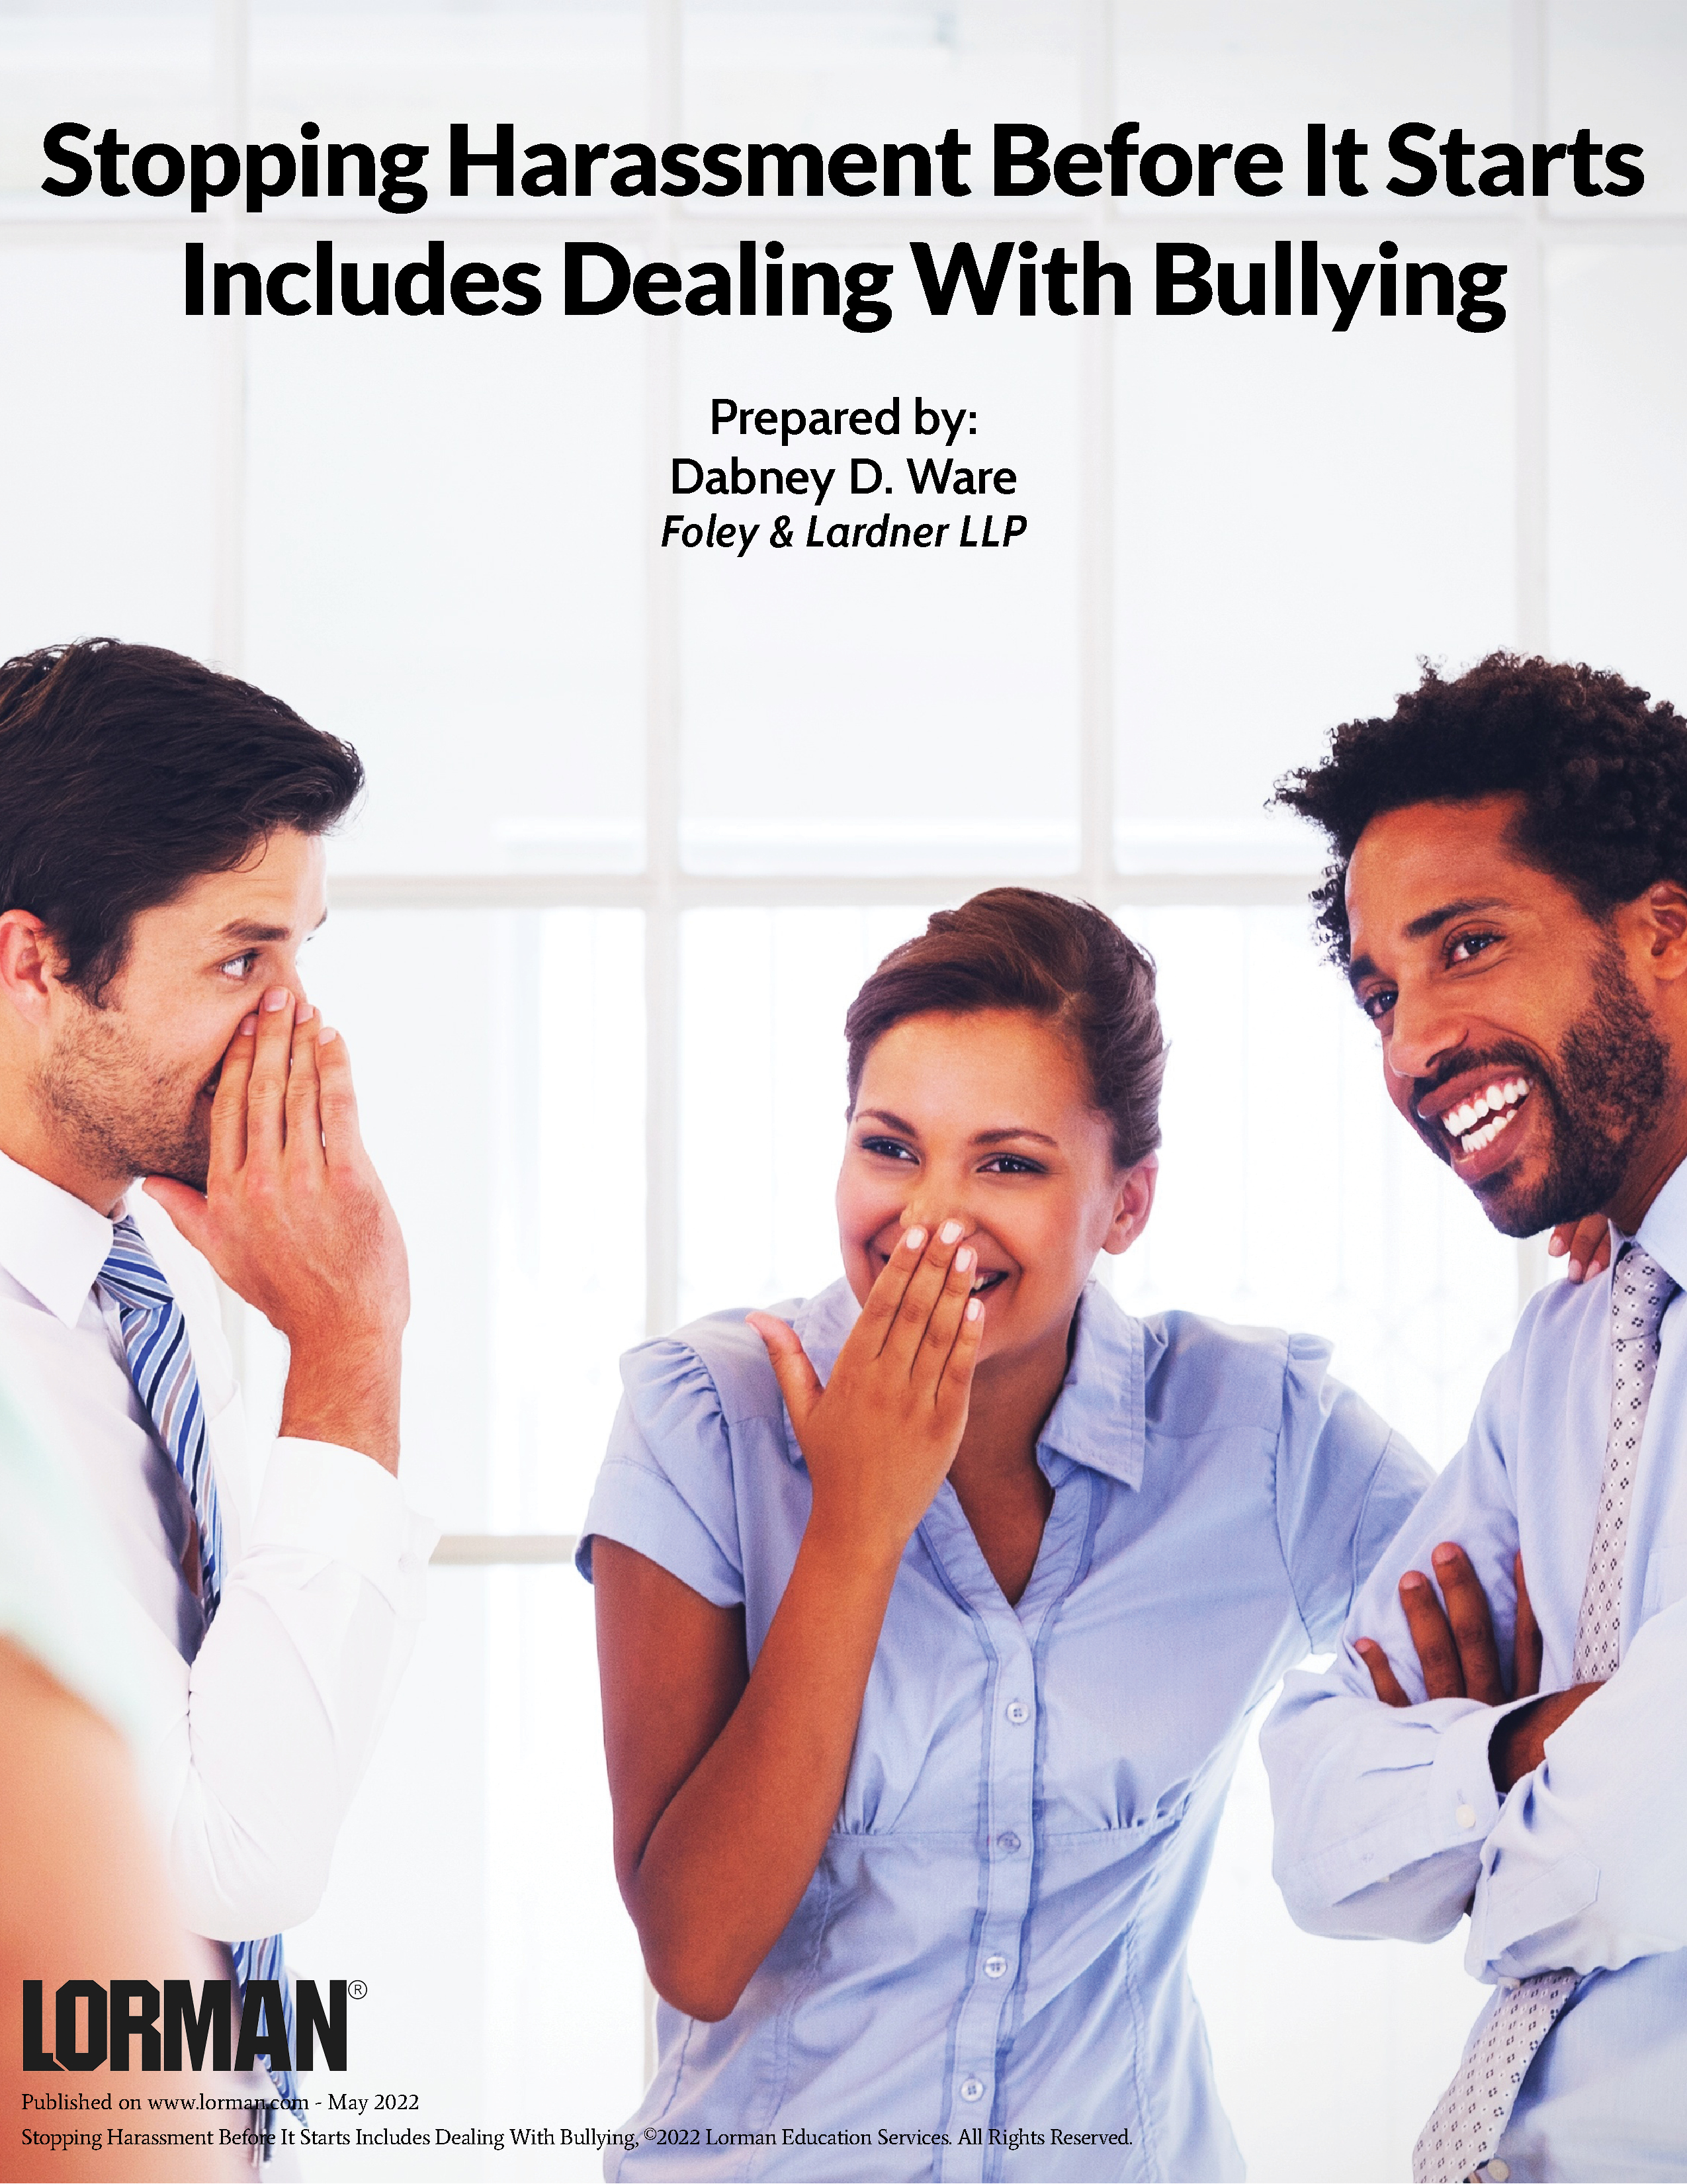 Stopping Harassment Before It Starts Includes Dealing With Bullying